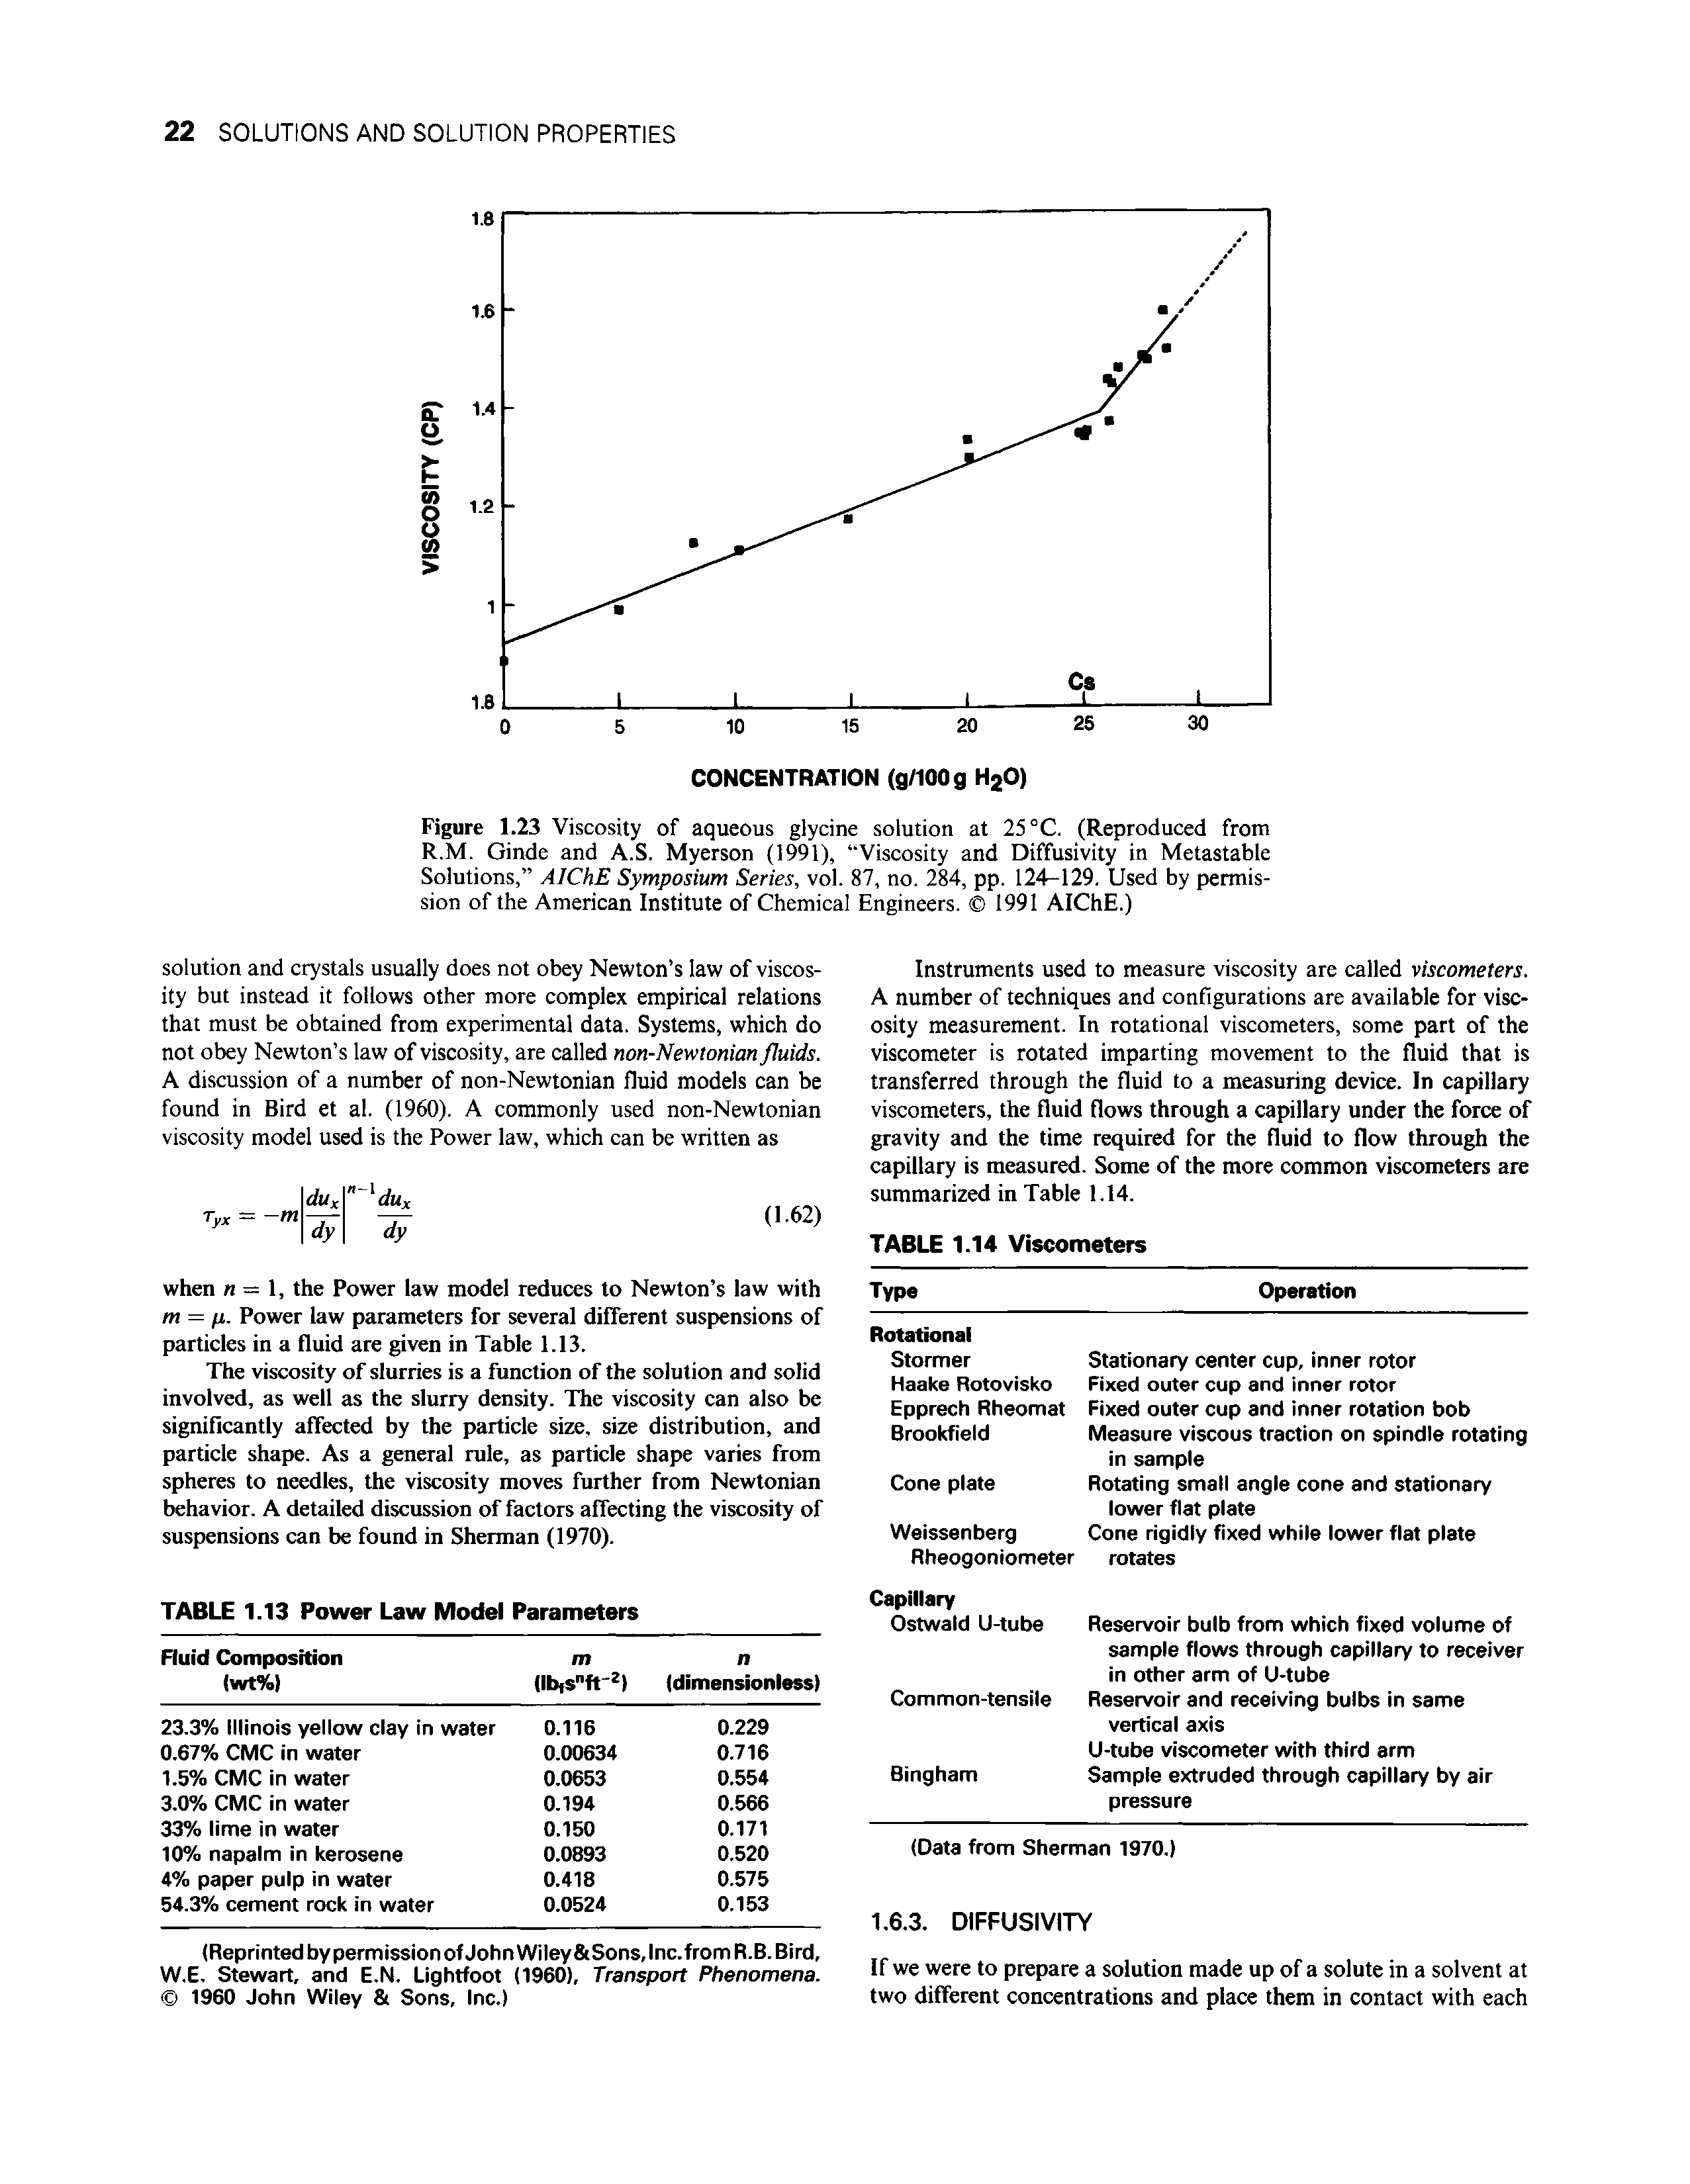 Figure 1.23 Viscosity of aqueous glycine solution at 25 °C. (Reproduced from R.M. Ginde and A.S. Myerson (1991), Viscosity and Diffusivity in Metastable Solutions, AlChE Symposium Series, vol. 87, no. 284, pp. 124-129. Used by permission of the American Institute of Chemical Engineers. 1991 AIChE.)...